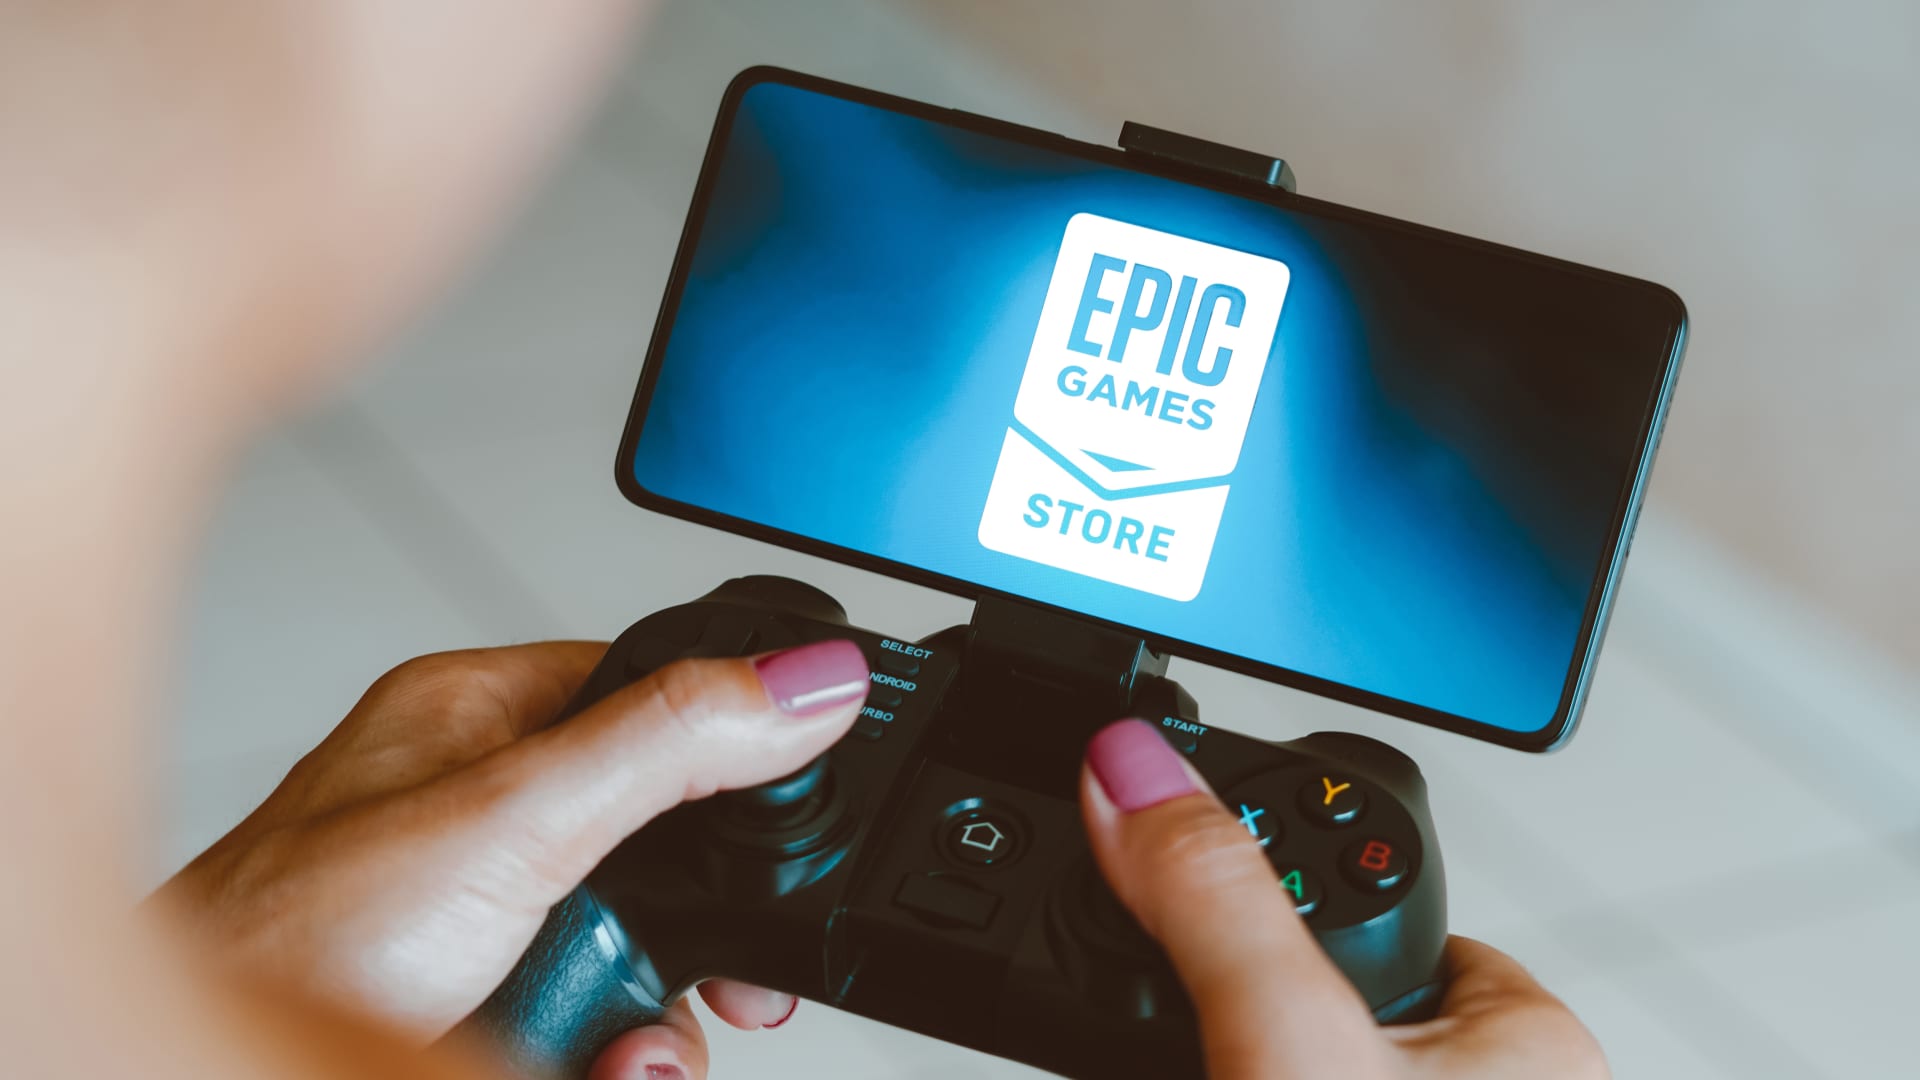 Disney to take .5 billion stake in Epic Games, work with Fortnite maker on new content